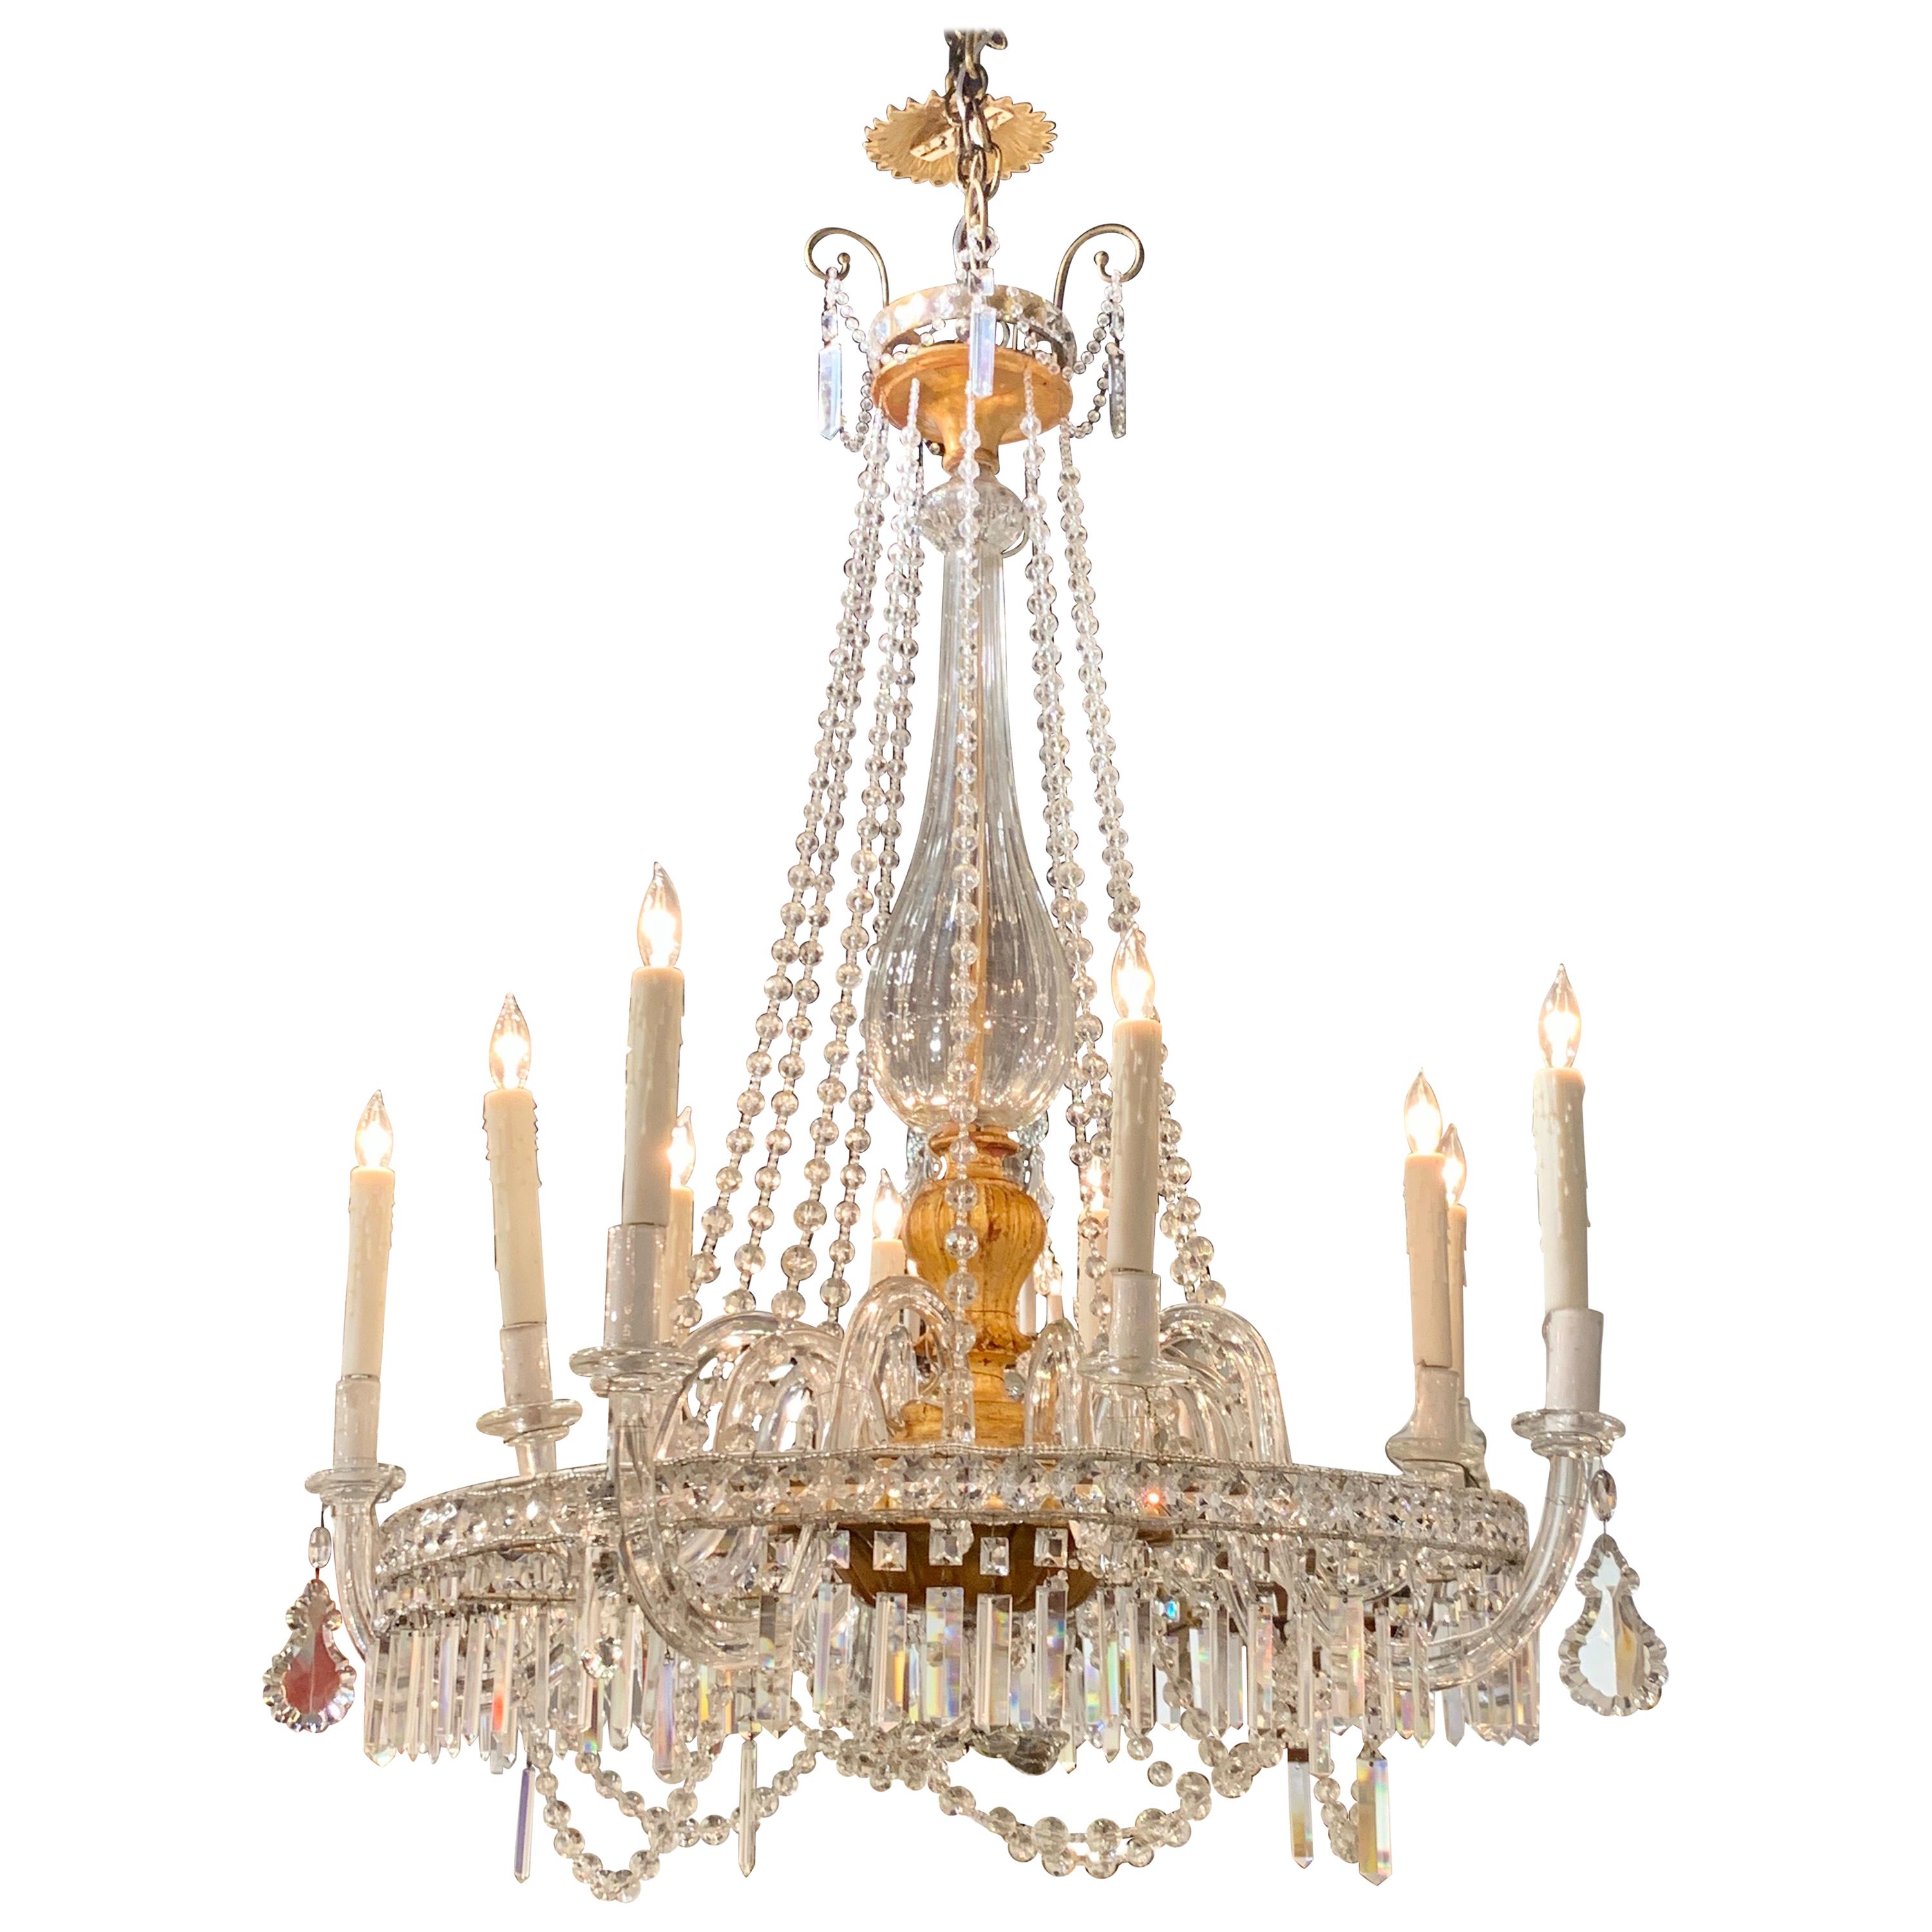 19th Century Italian Giltwood and Crystal 10-Light Chandelier For Sale